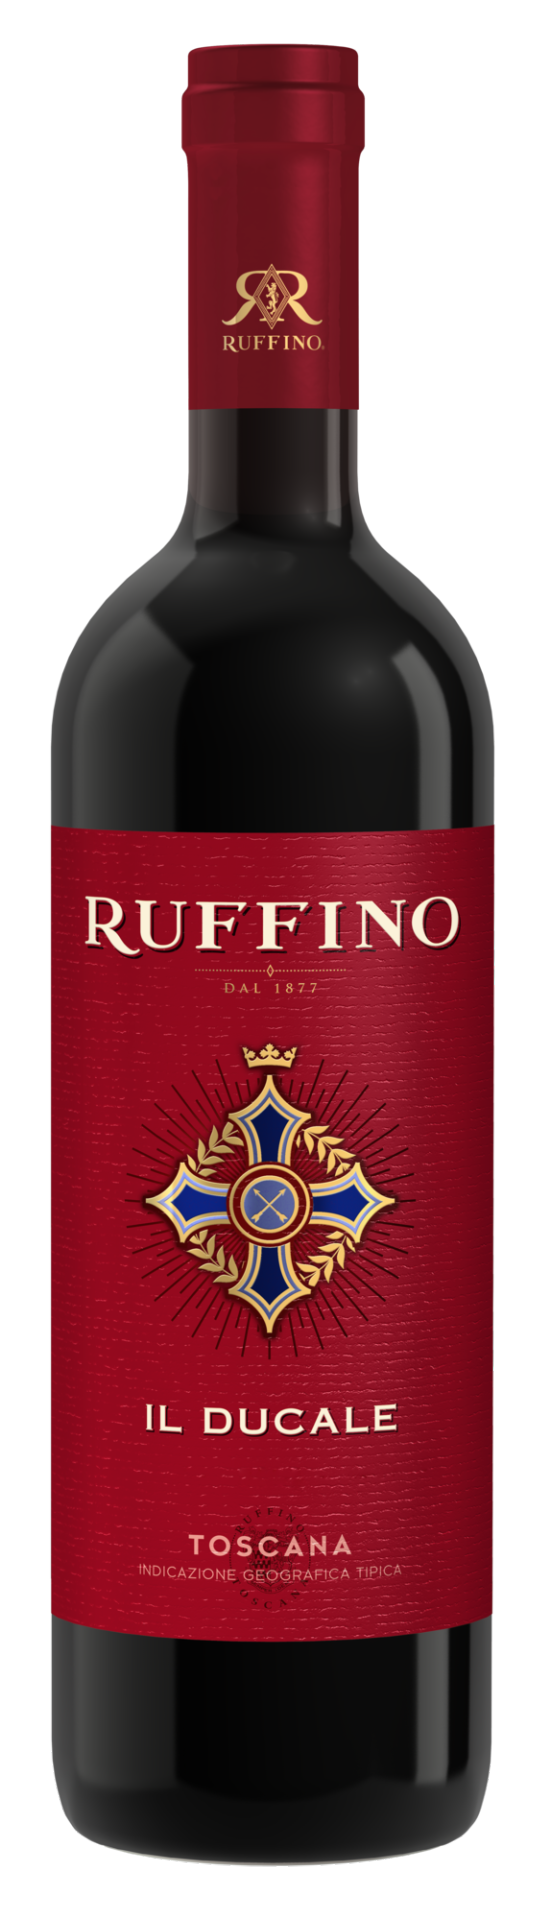 Ruffino Il Ducale Toscana Igt Rosso Red Blend Italian Red Wine 750 Ml Shipt